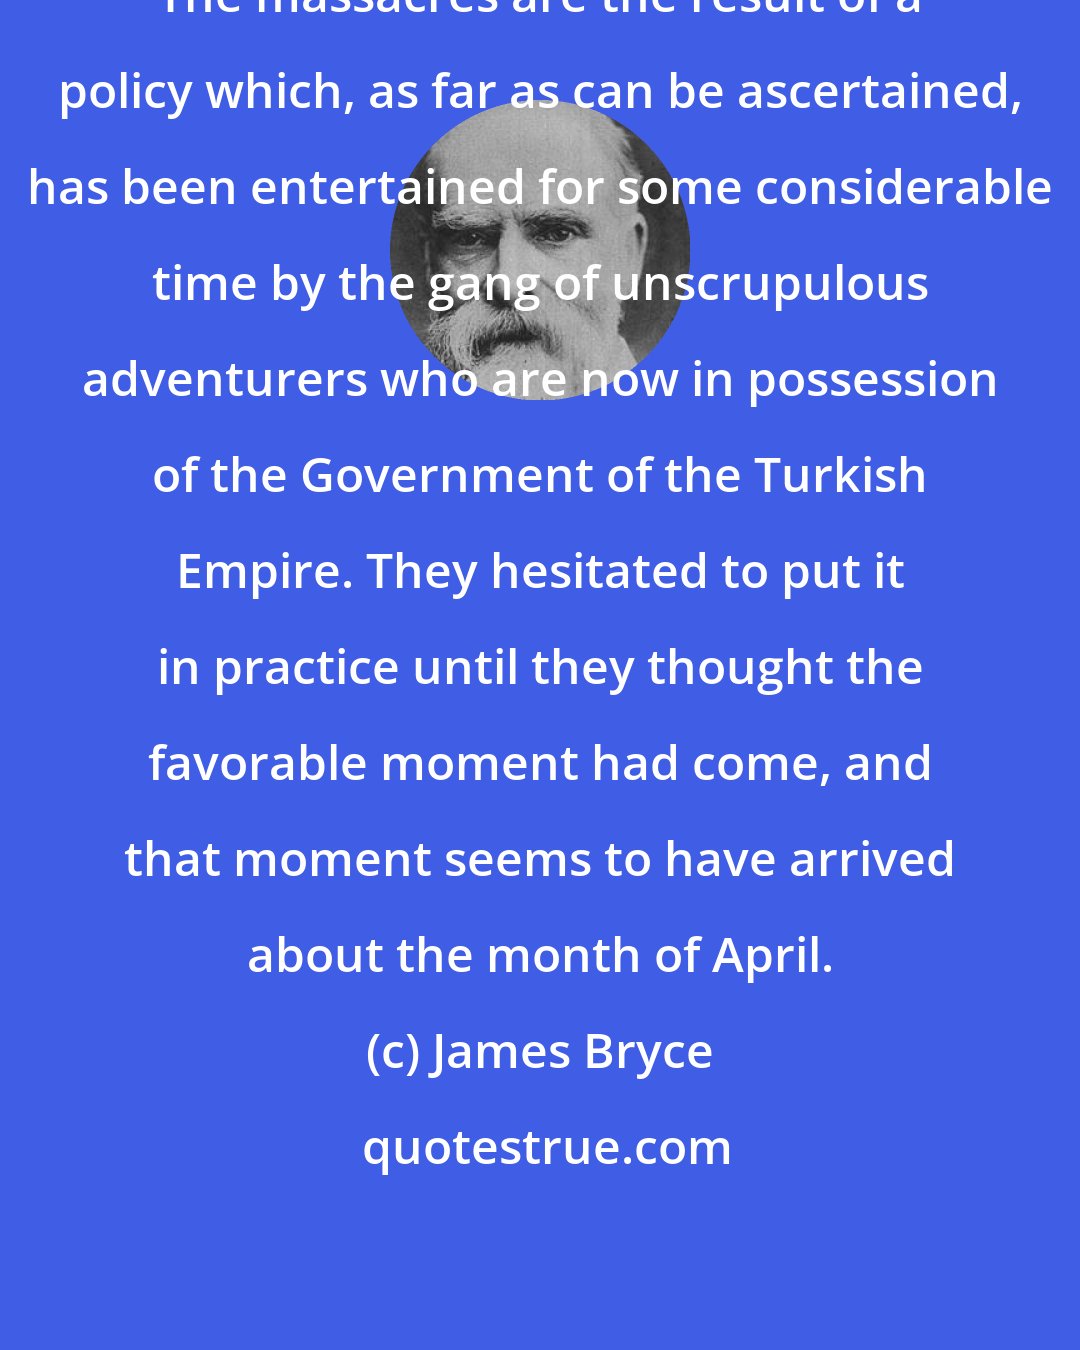 James Bryce: The massacres are the result of a policy which, as far as can be ascertained, has been entertained for some considerable time by the gang of unscrupulous adventurers who are now in possession of the Government of the Turkish Empire. They hesitated to put it in practice until they thought the favorable moment had come, and that moment seems to have arrived about the month of April.